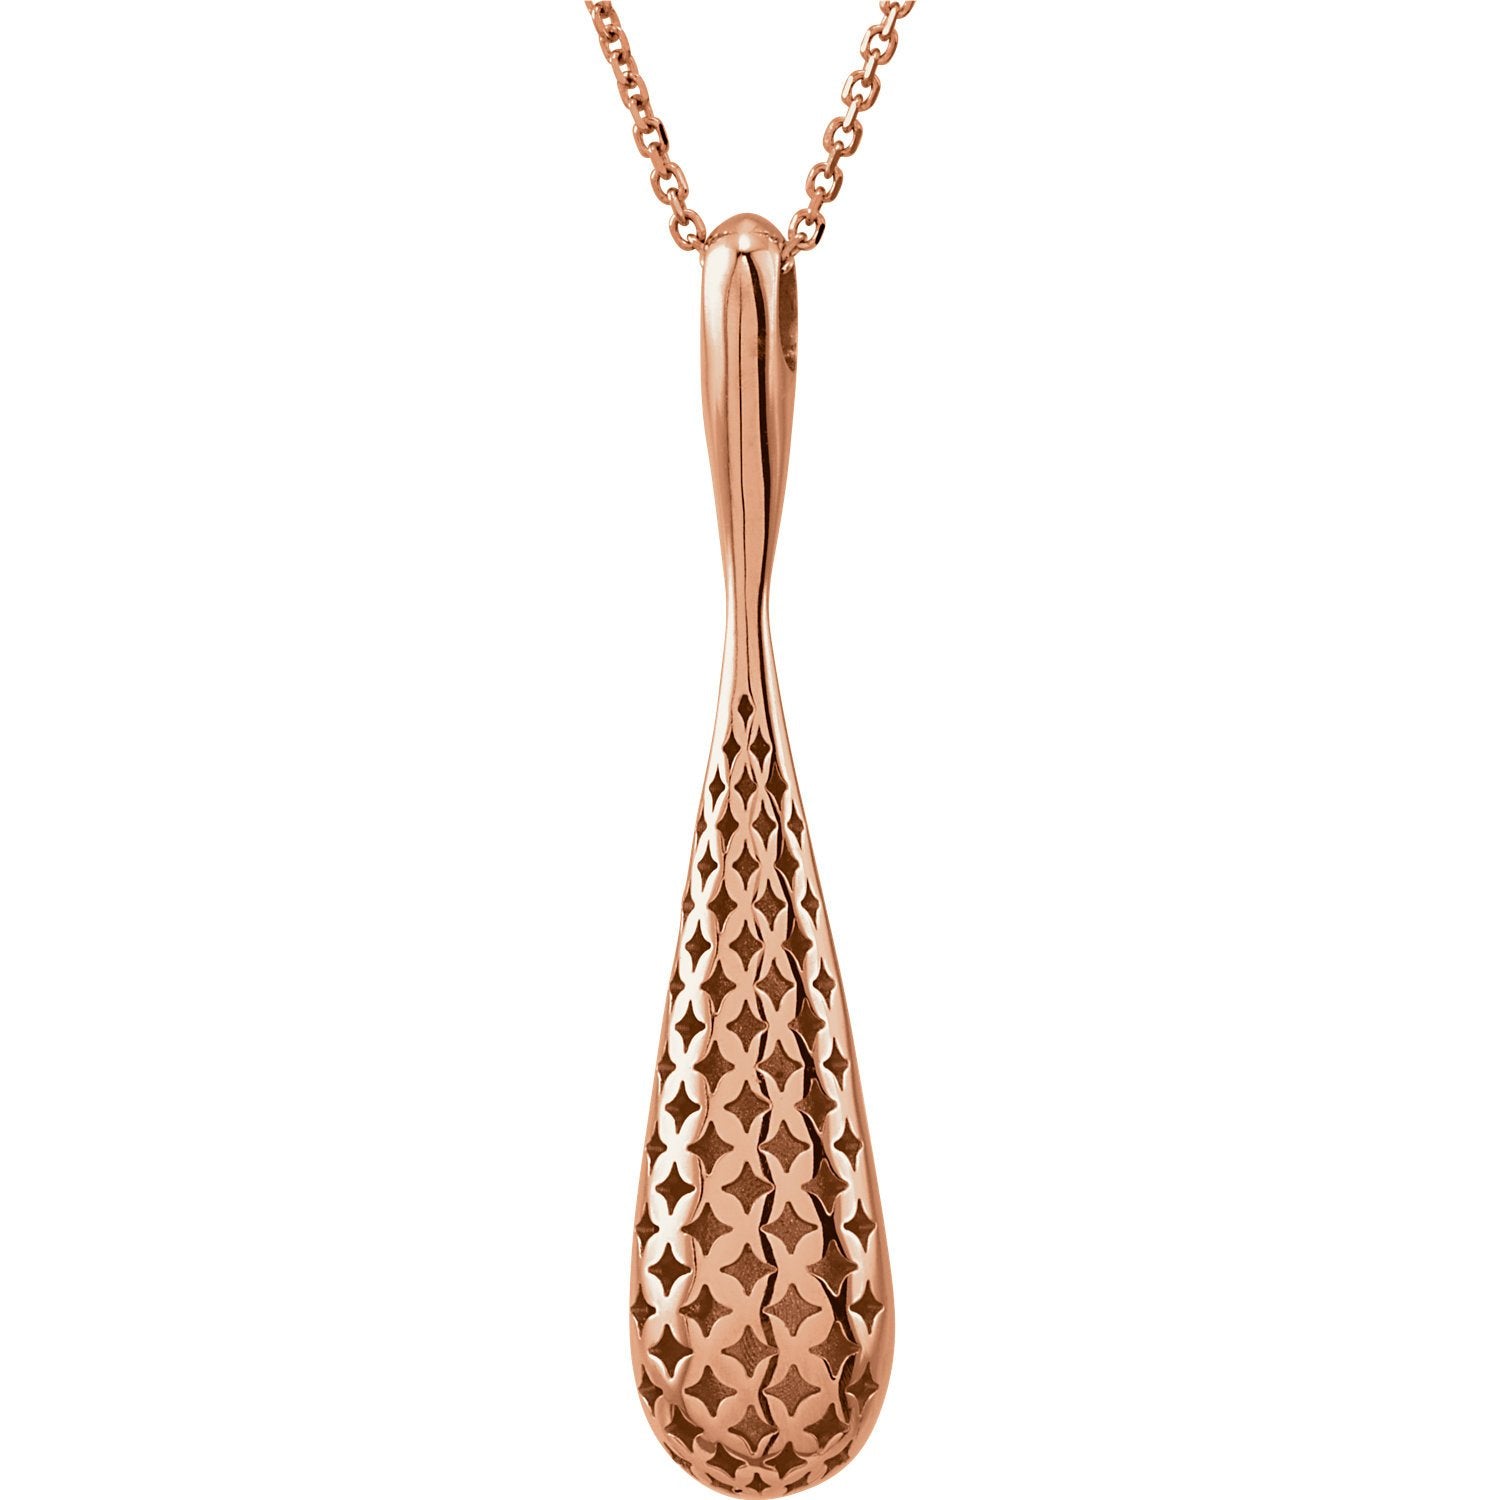 Reversable Smooth and Patterned Teardrop 18" Necklace - 14k Gold (Y, W, or R)